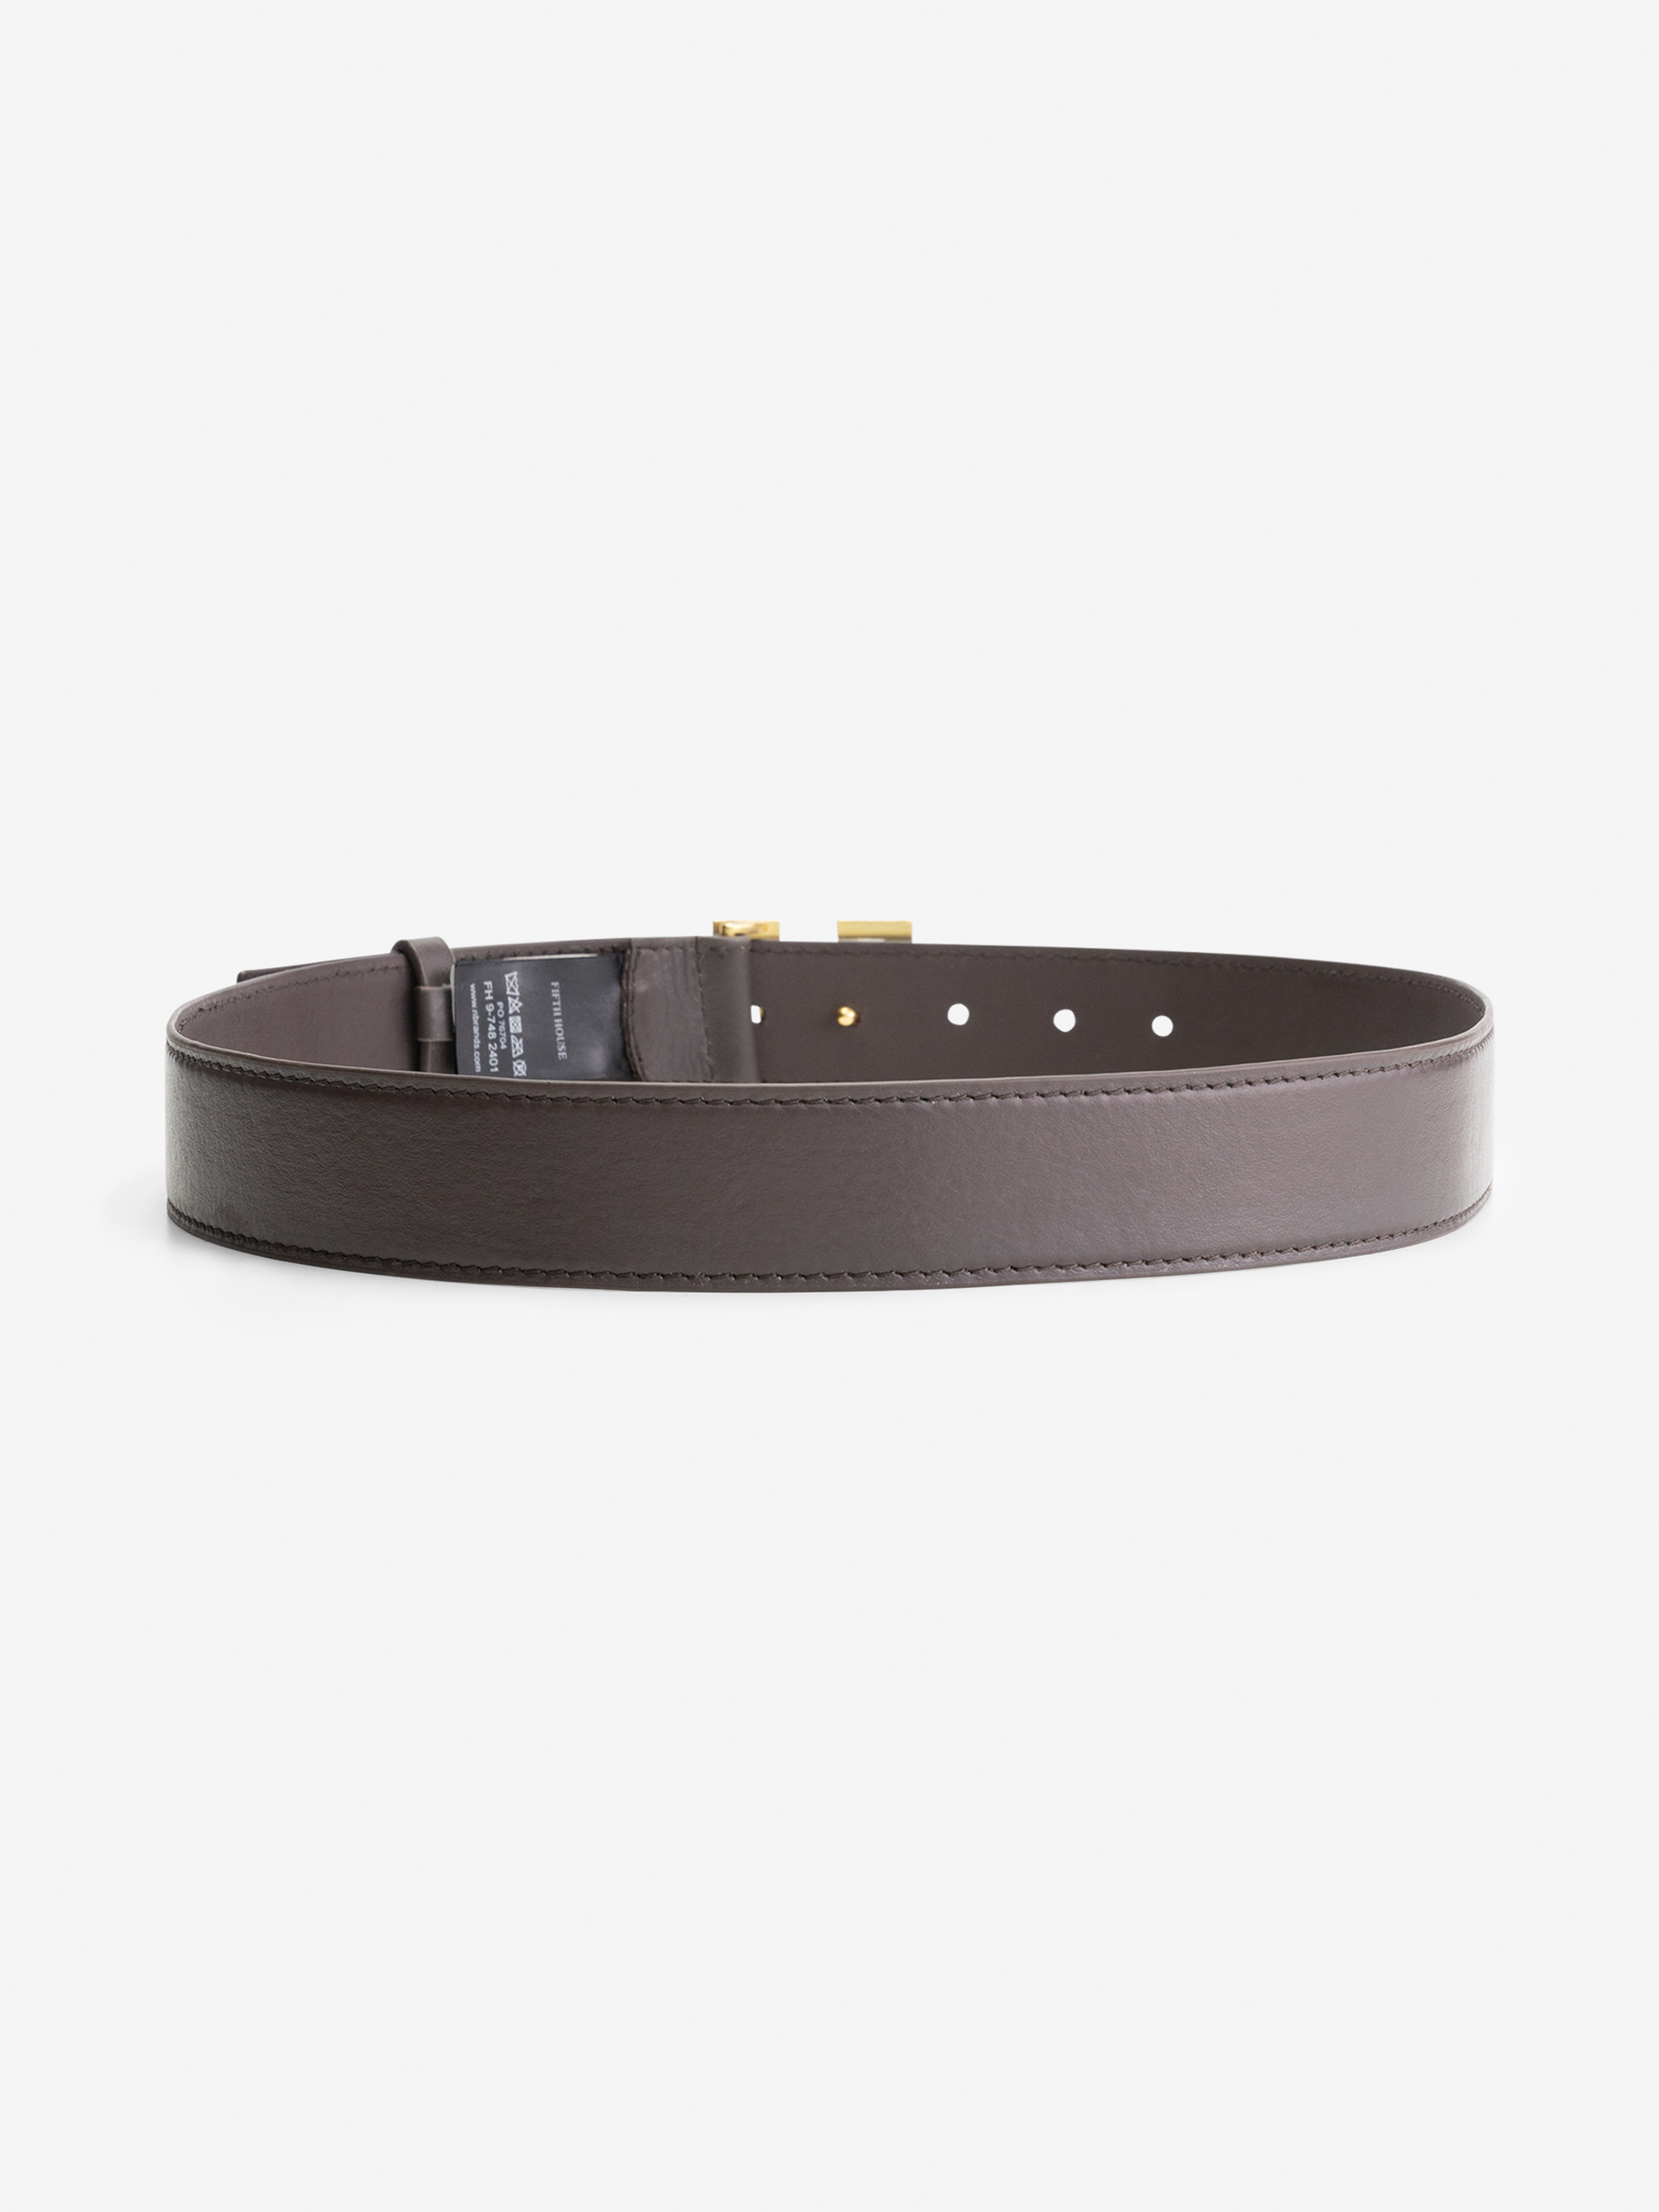  Small Leather waist belt with logo buckle